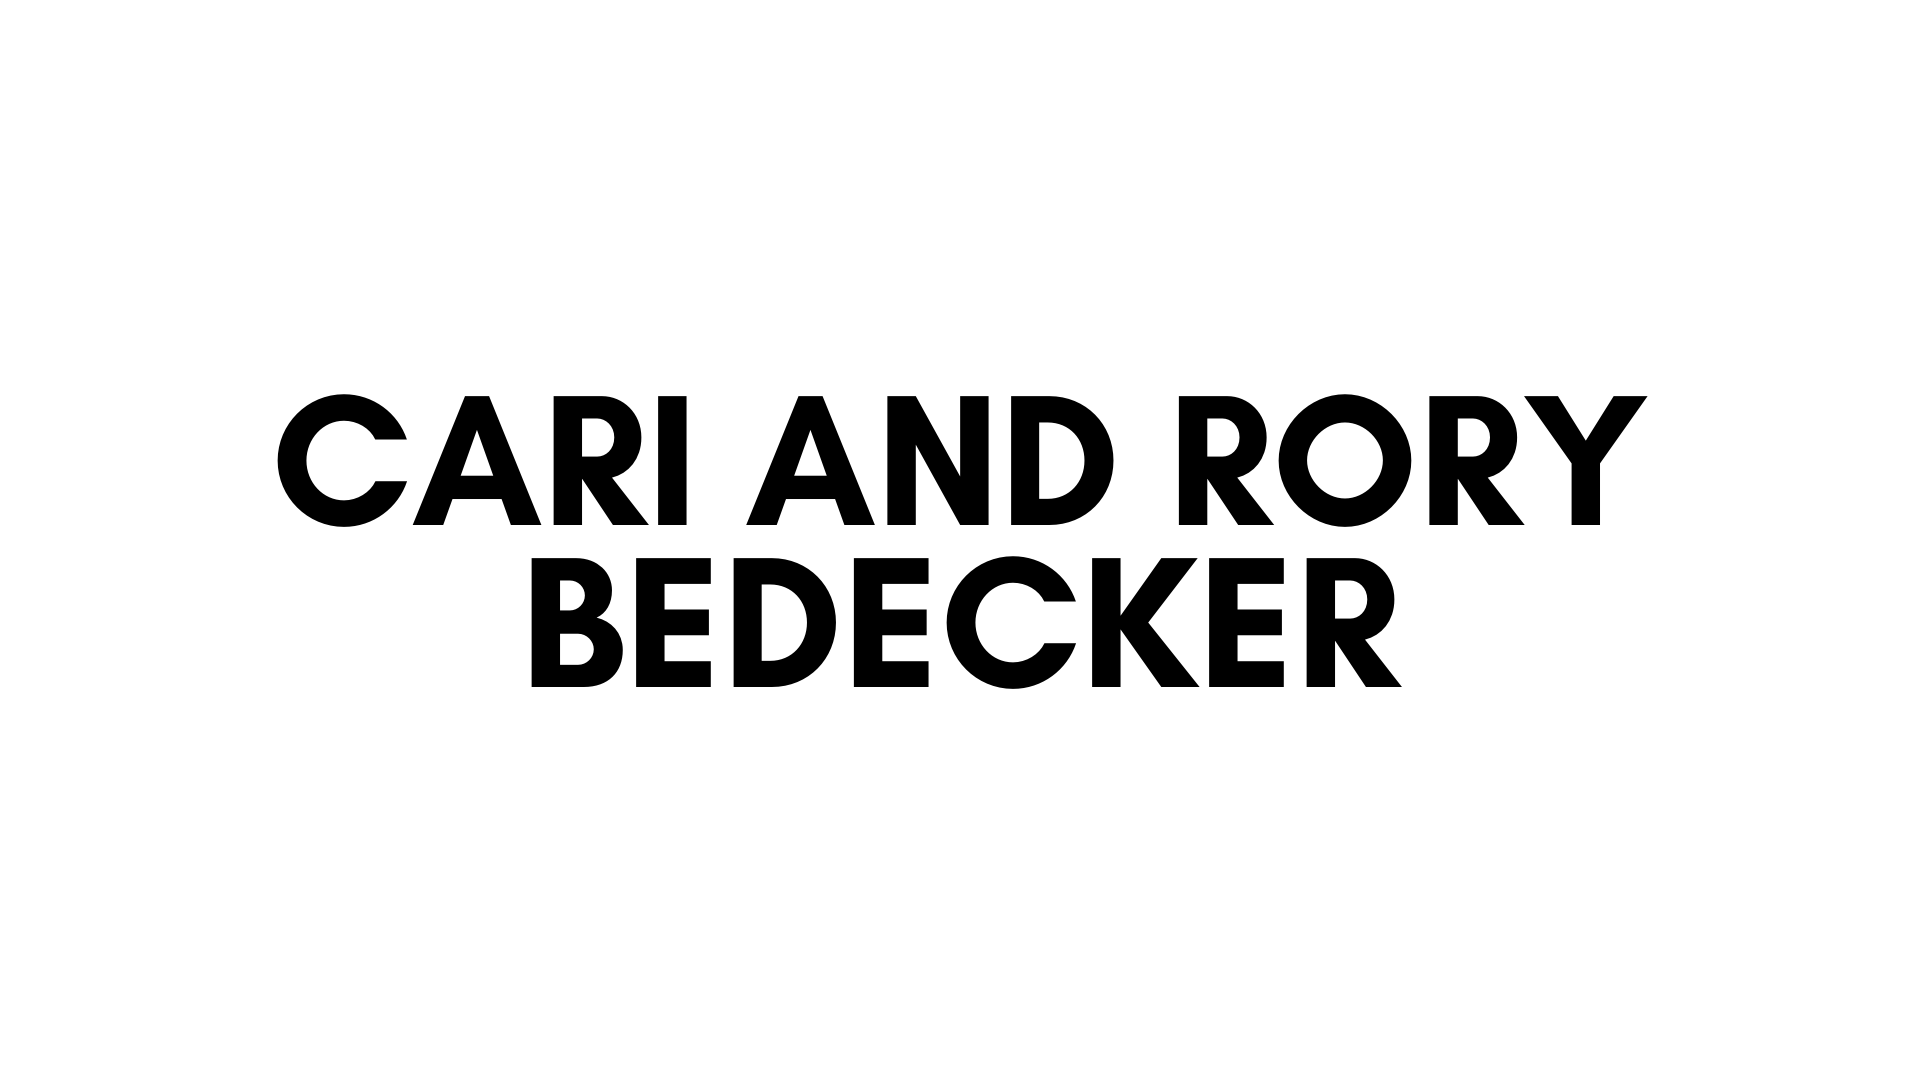 CARI AND RORY BEDECKER